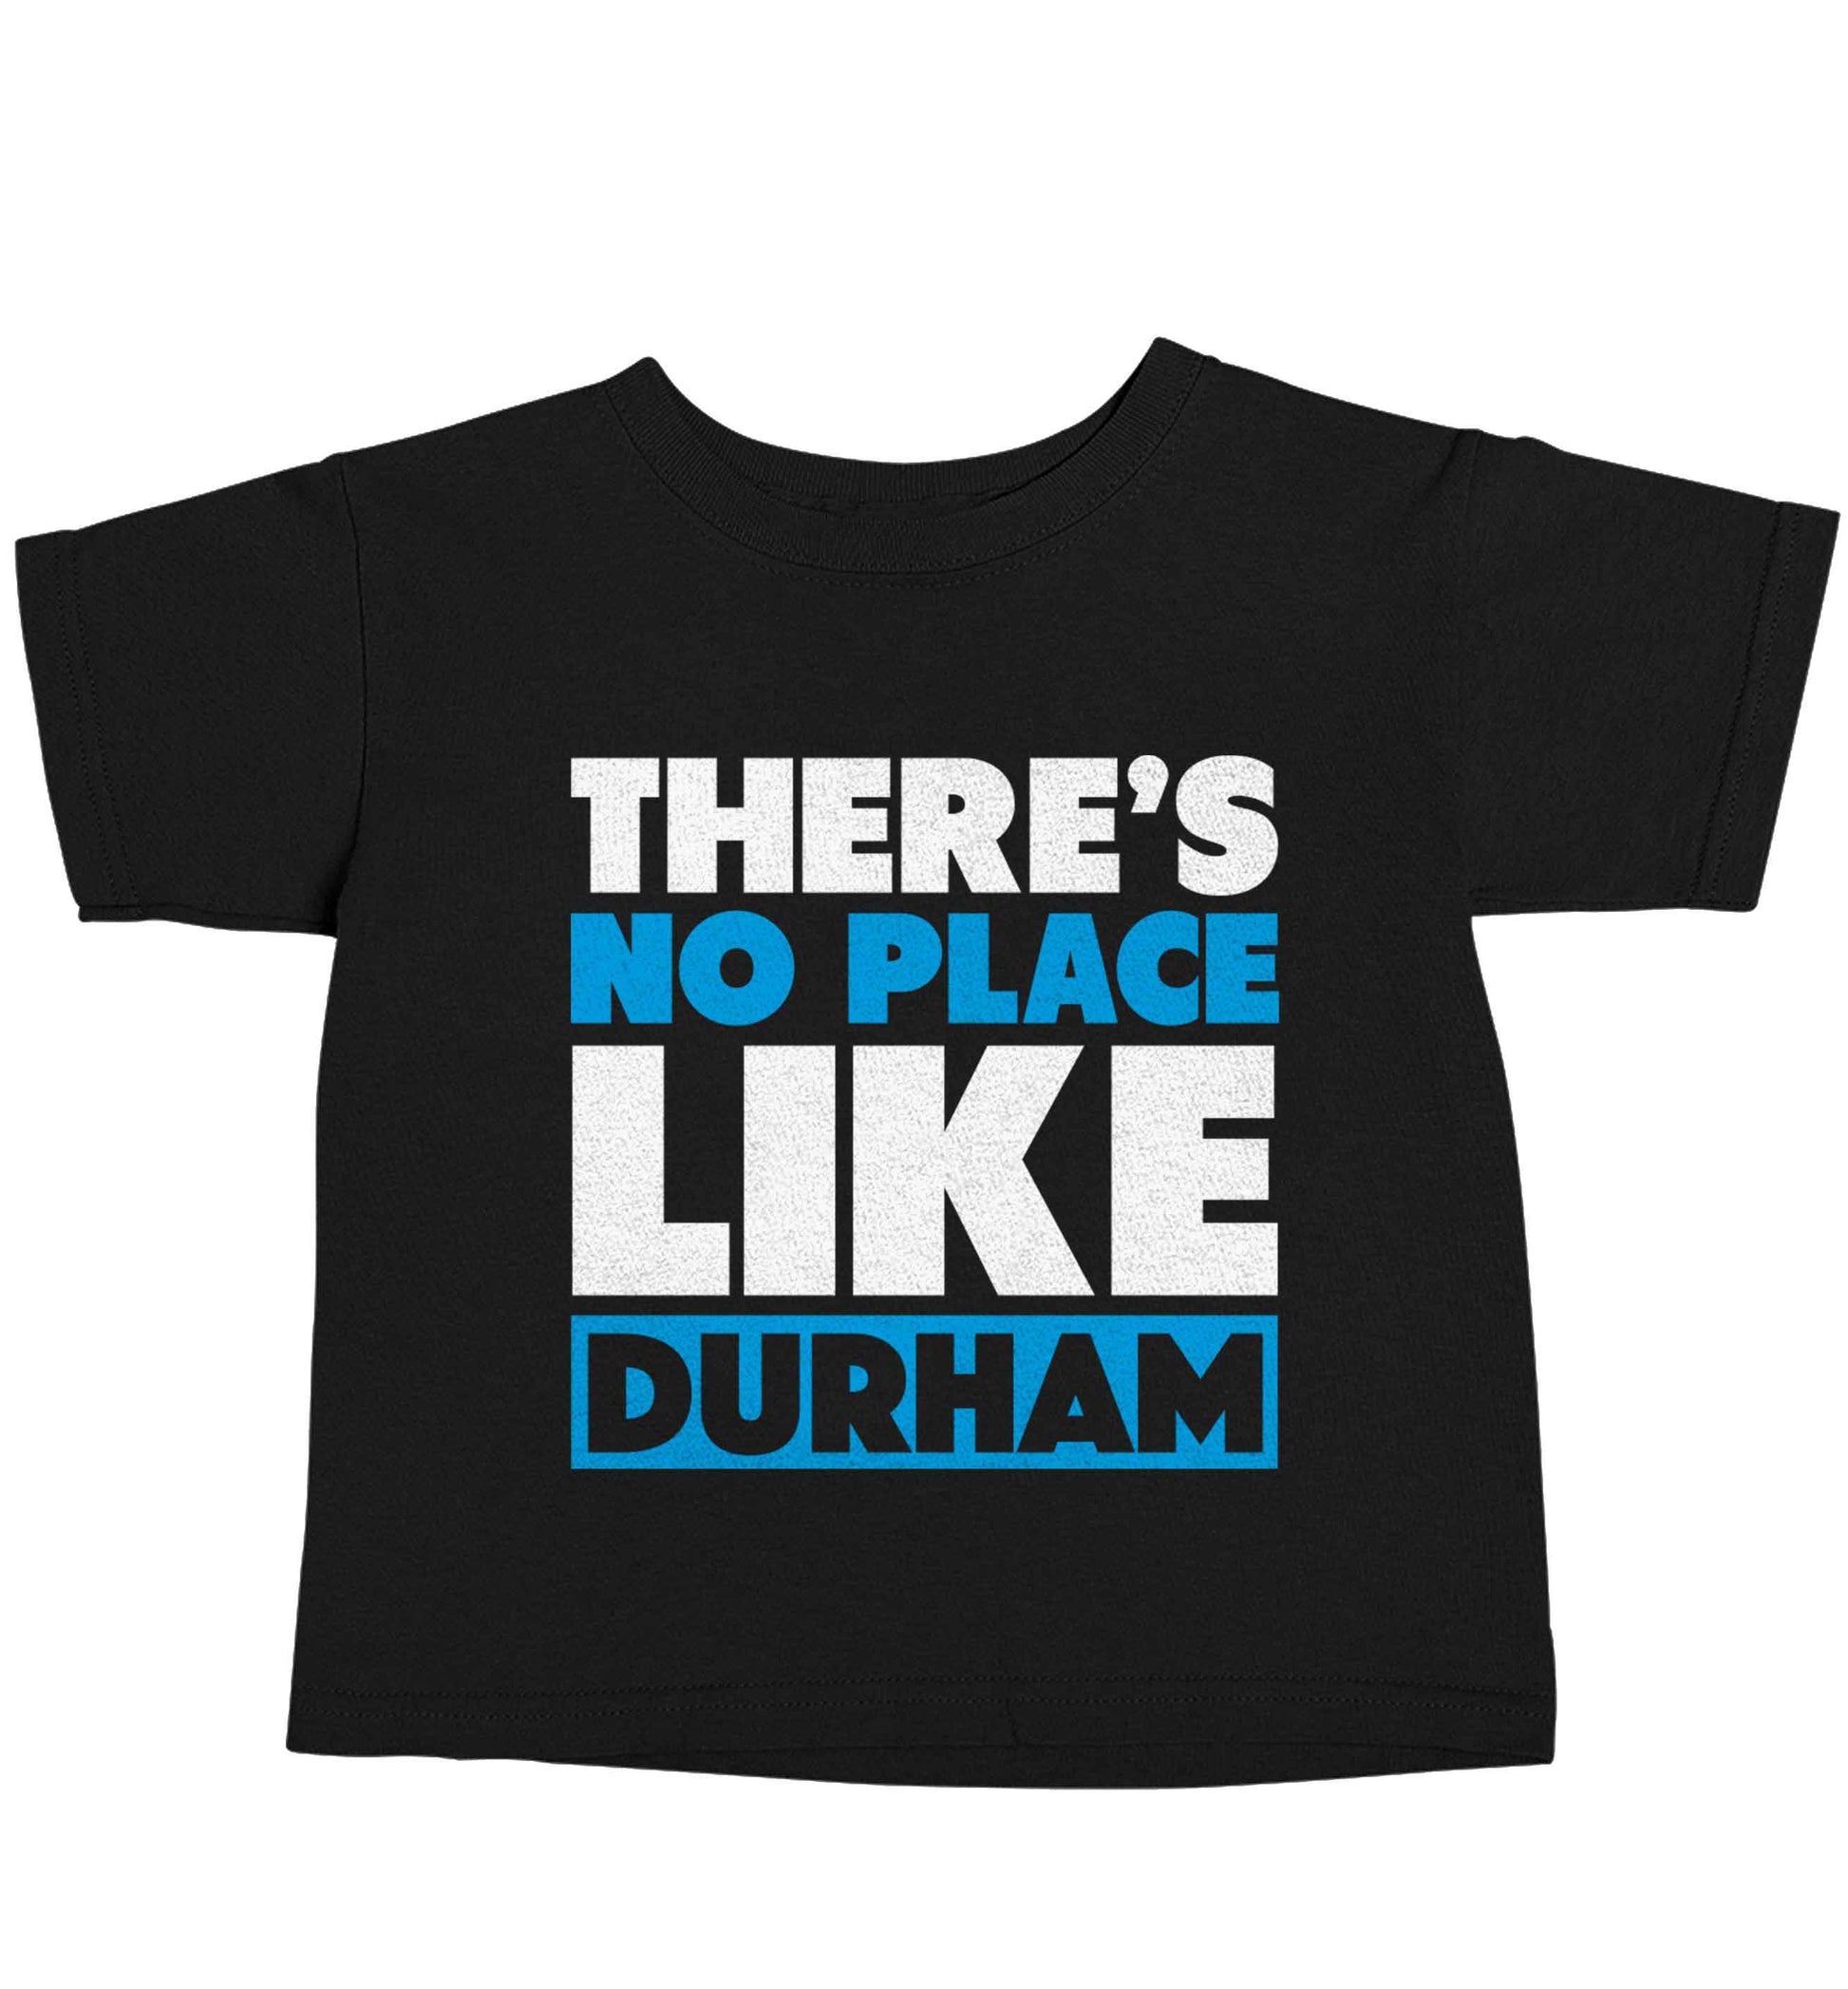 There's no place like Durham Black baby toddler Tshirt 2 years